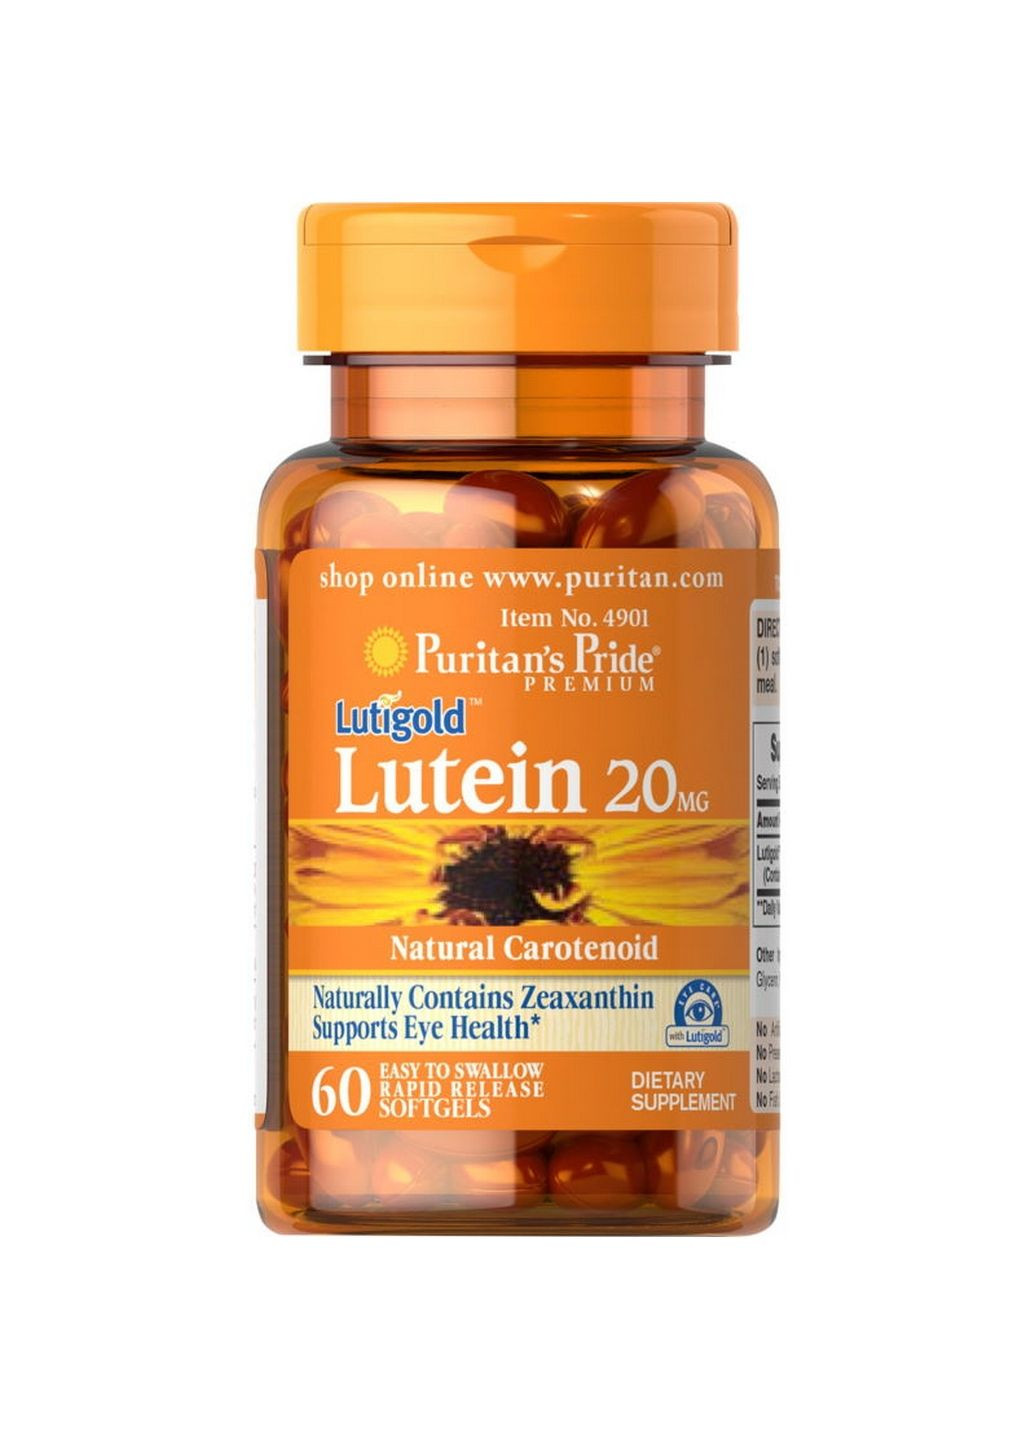 Натуральна добавка Lutein 20 mg with Zeaxanthin, 60 капсул Puritans Pride (293482793)